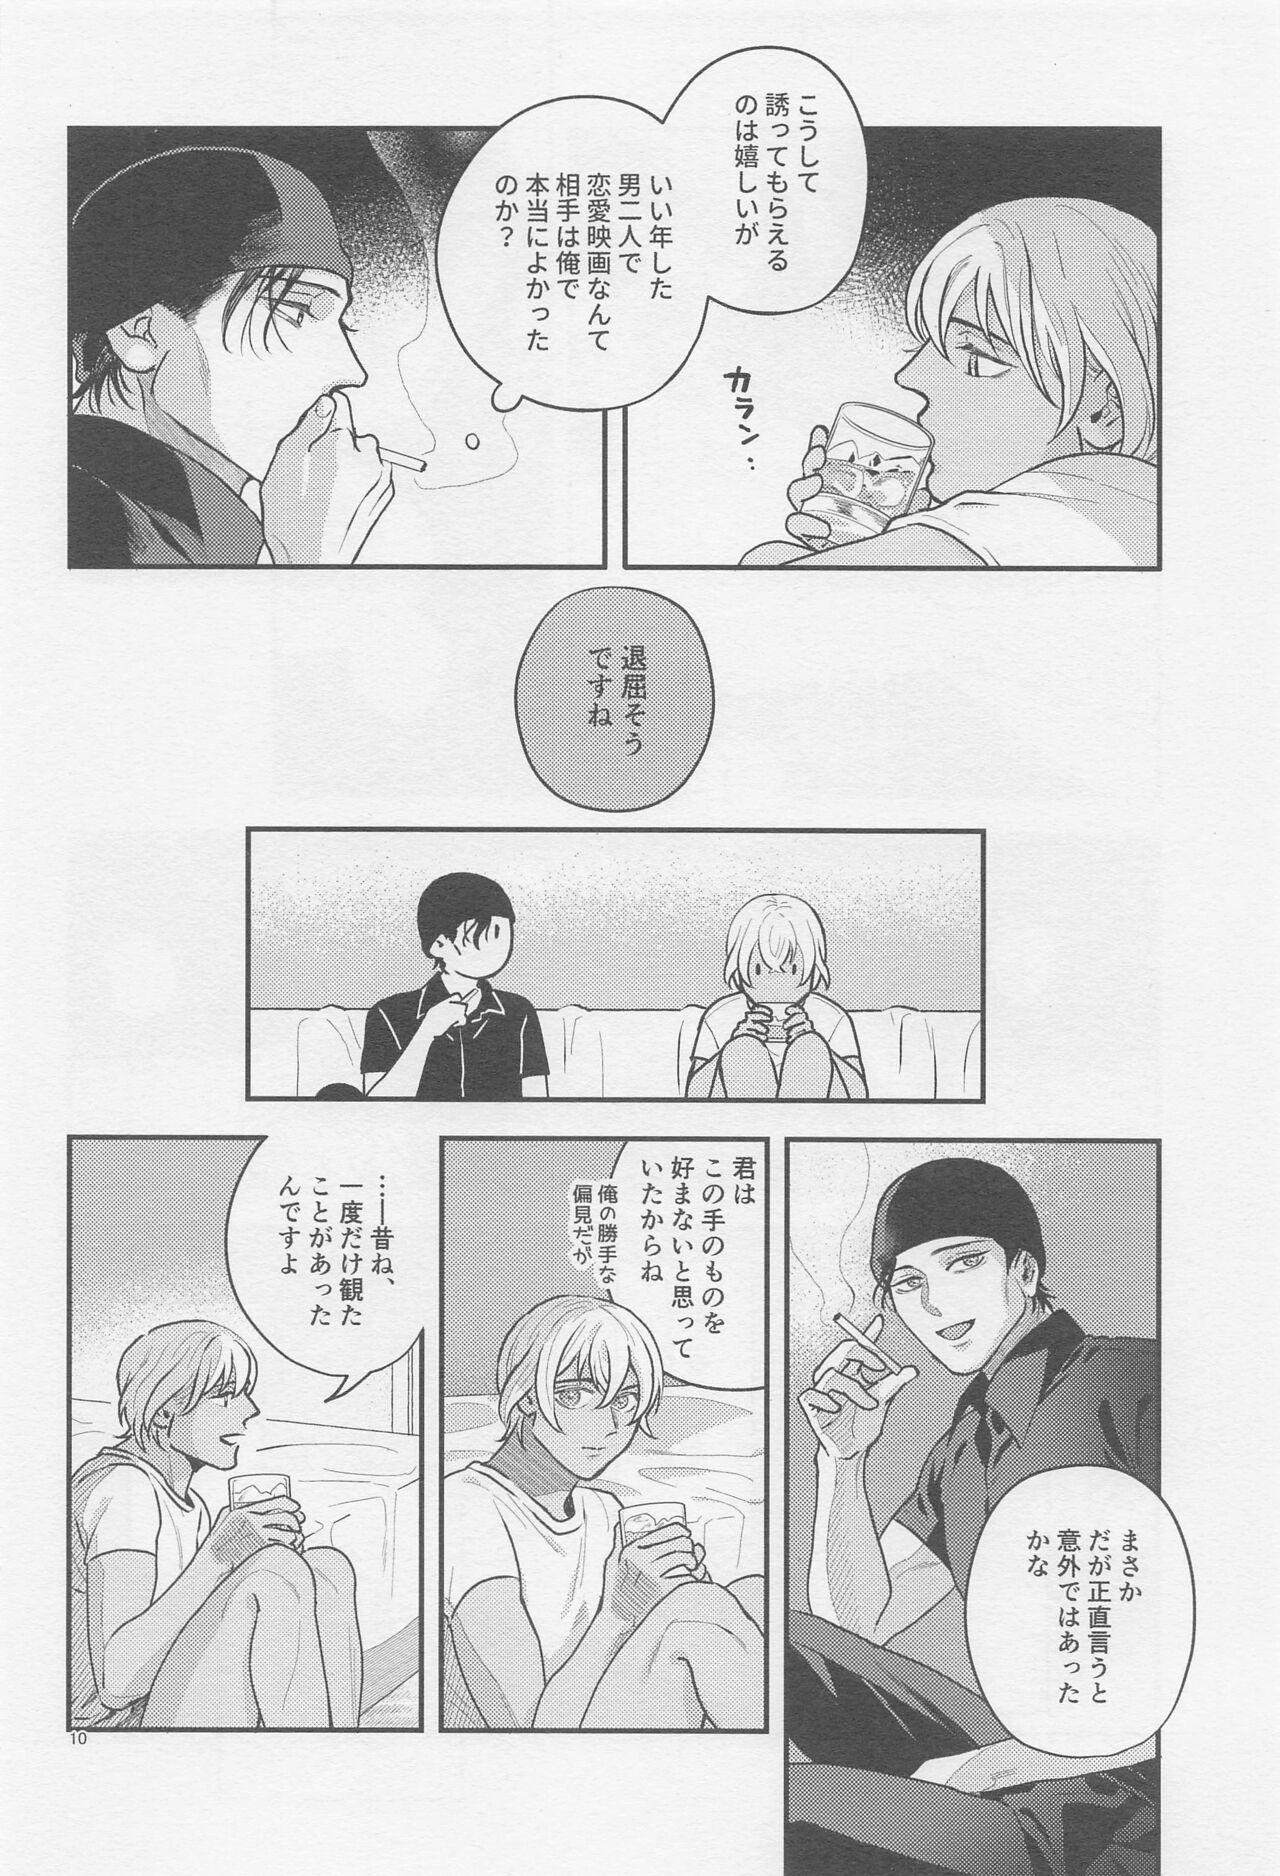 Spooning The first．．． - Detective conan | meitantei conan Fleshlight - Page 9